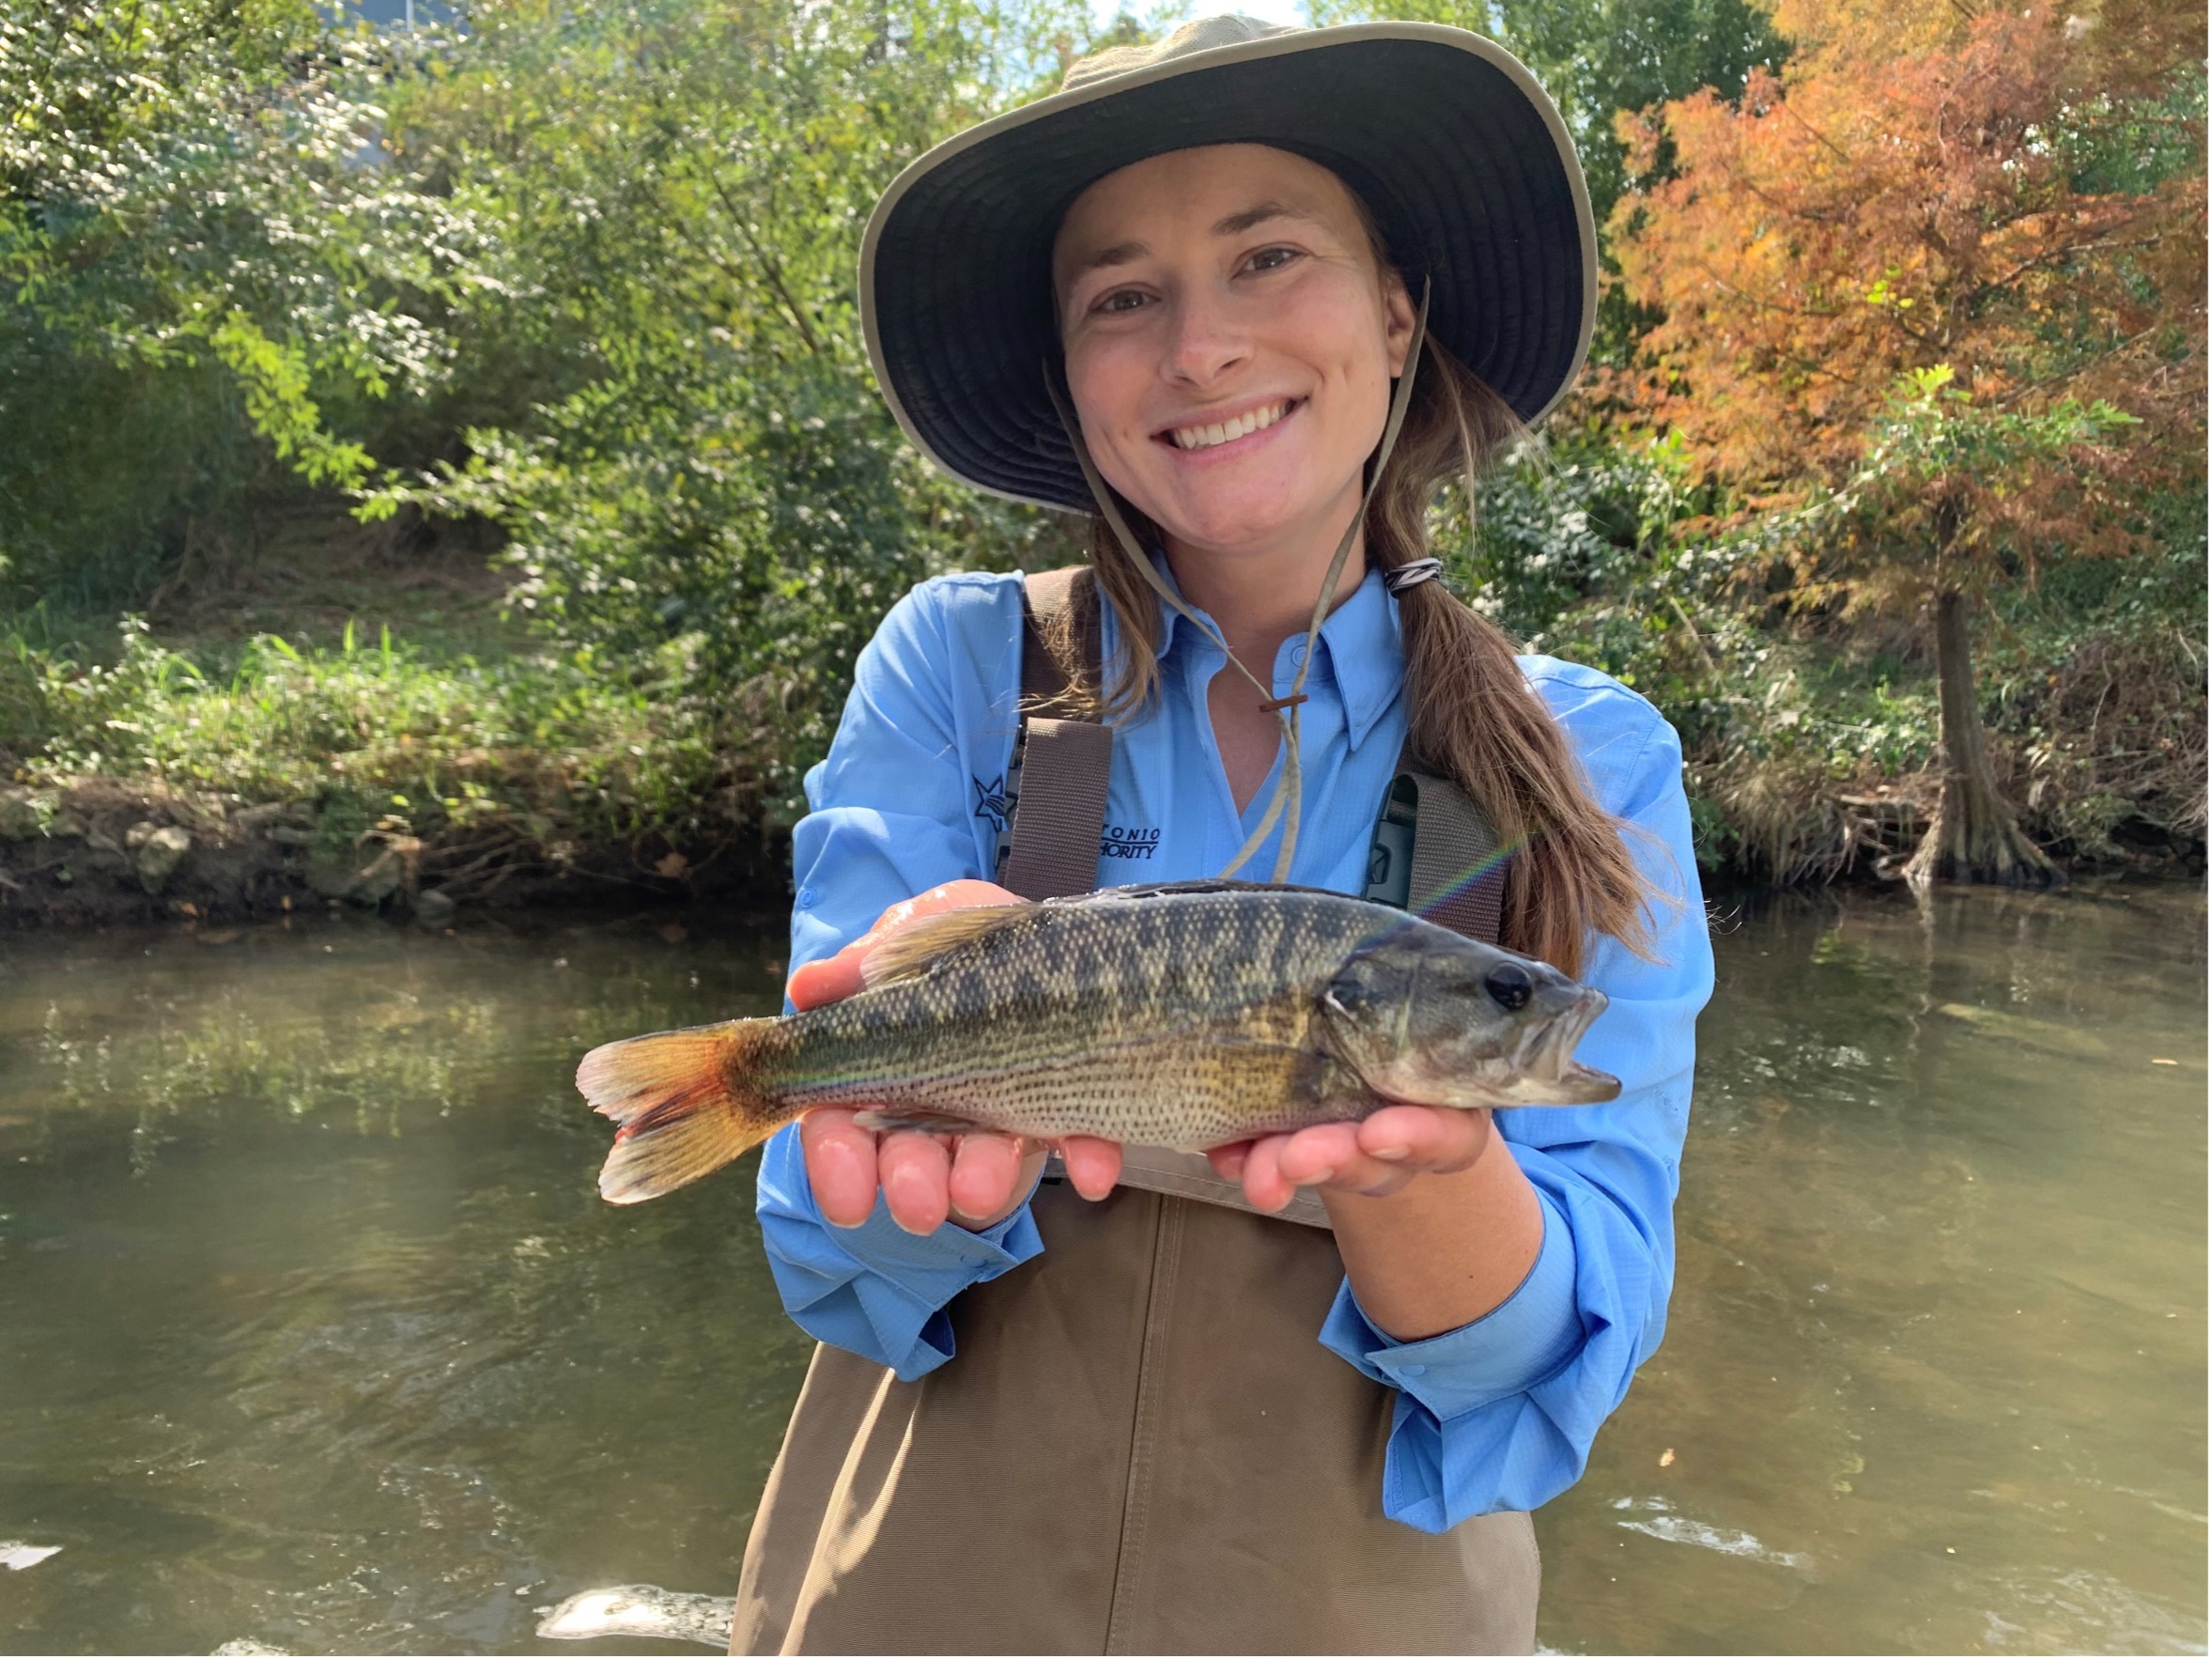 Aquatic biologist Zoe Nichols holds the State Fish of Texas, the Guadalupe bass (Micropterus treculii).